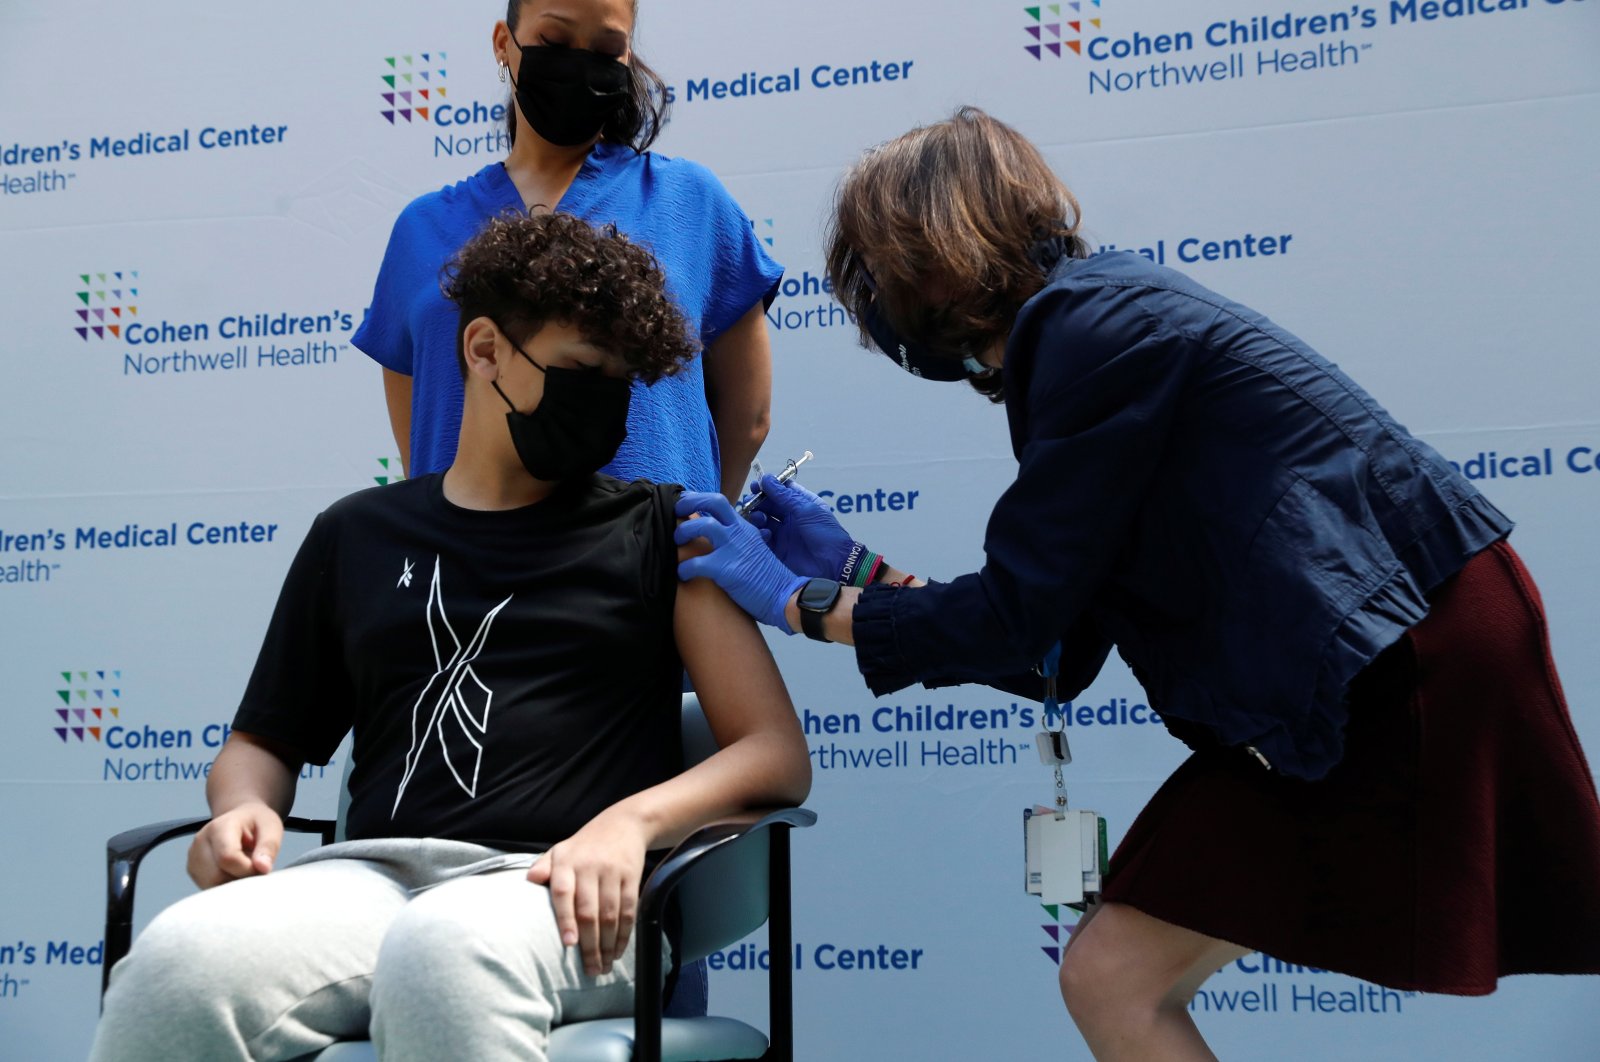 Michael Binparuis, 15, of Nesconset, New York, receives a dose of the Pfizer-BioNTech vaccine for coronavirus at Northwell Health's Cohen Children's Medical Center in New Hyde Park, New York, U.S., May 13, 2021. (Reuters Photo)